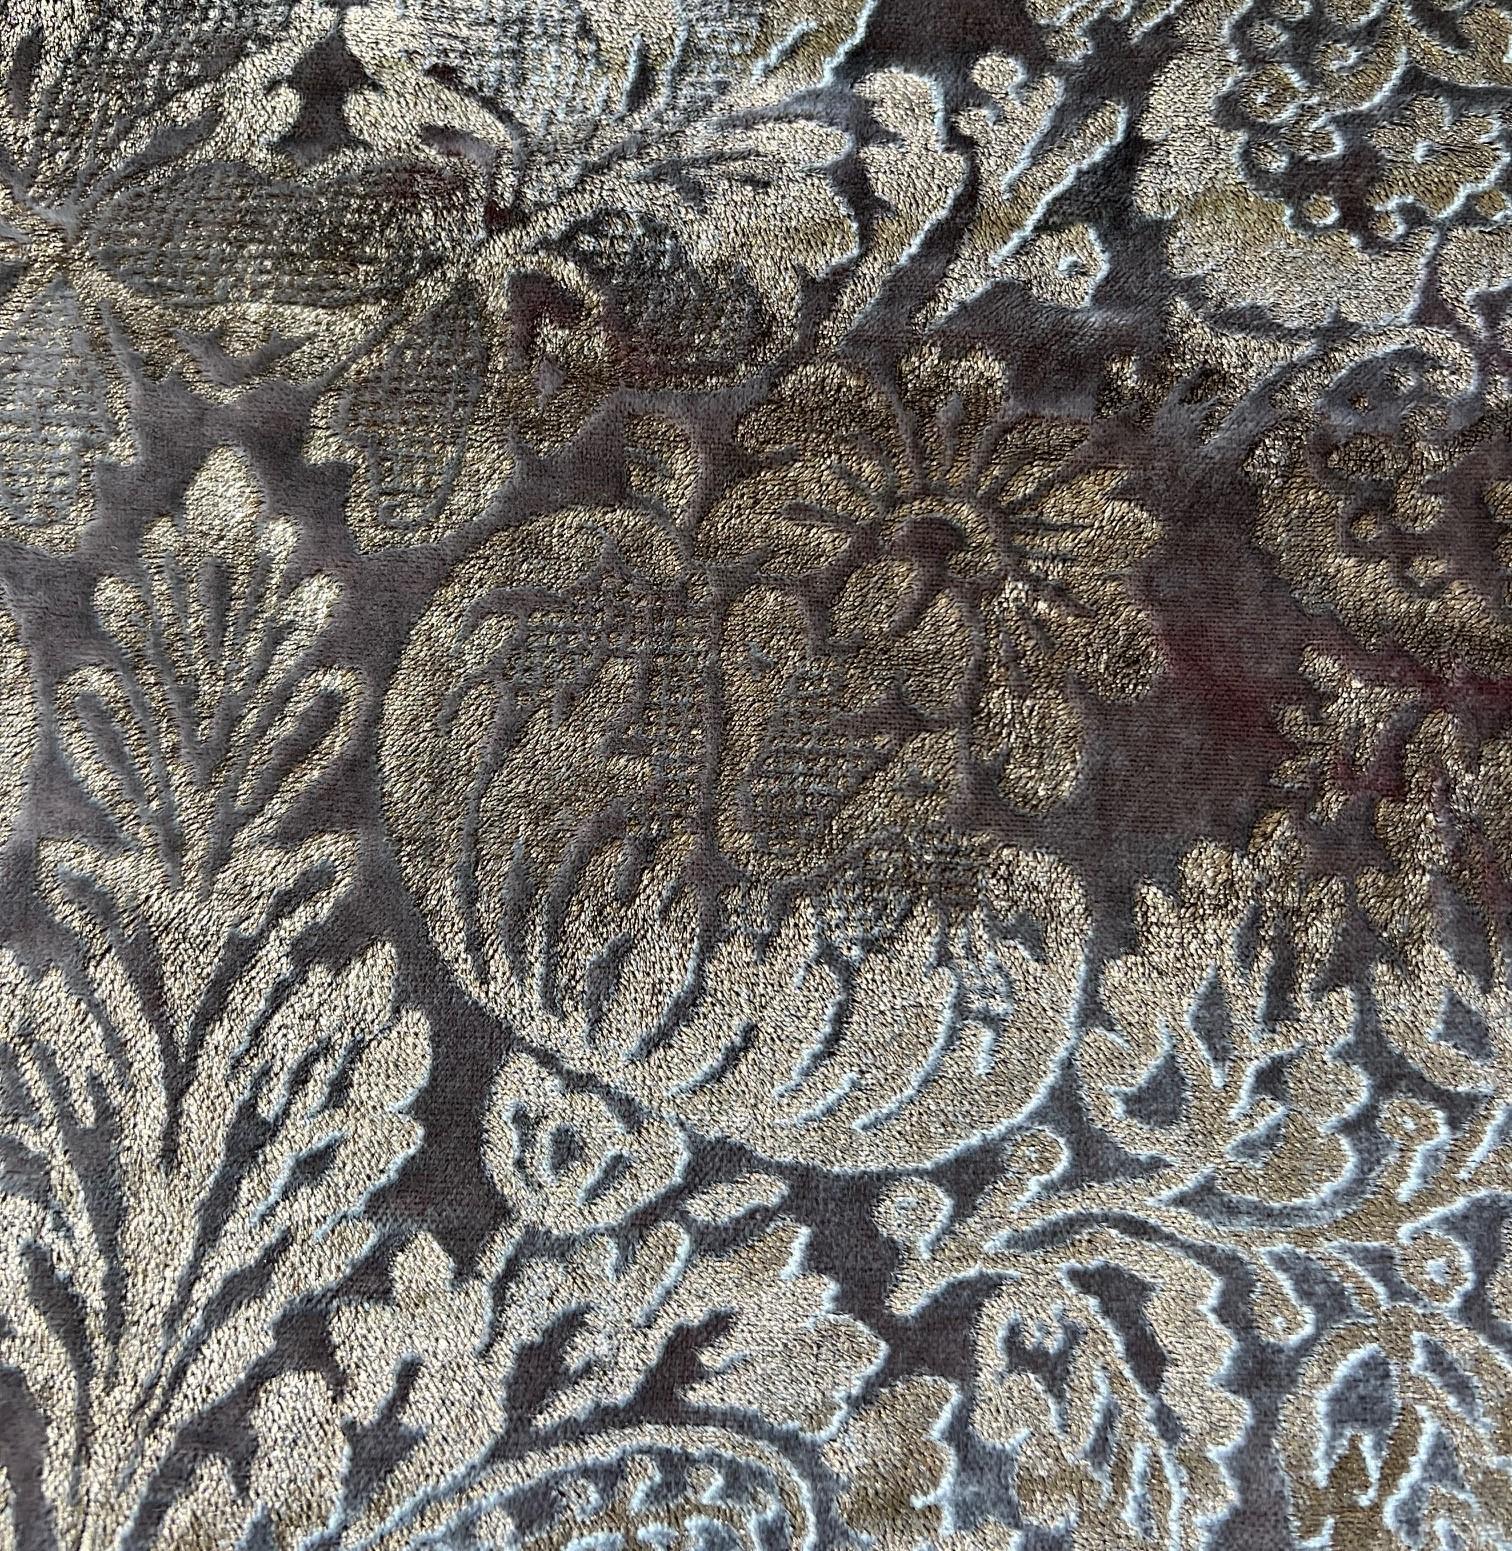 Rococo Rare Fortuny Silk Velvet in Warm French Brown, Stenciled with Pigmented Gold For Sale